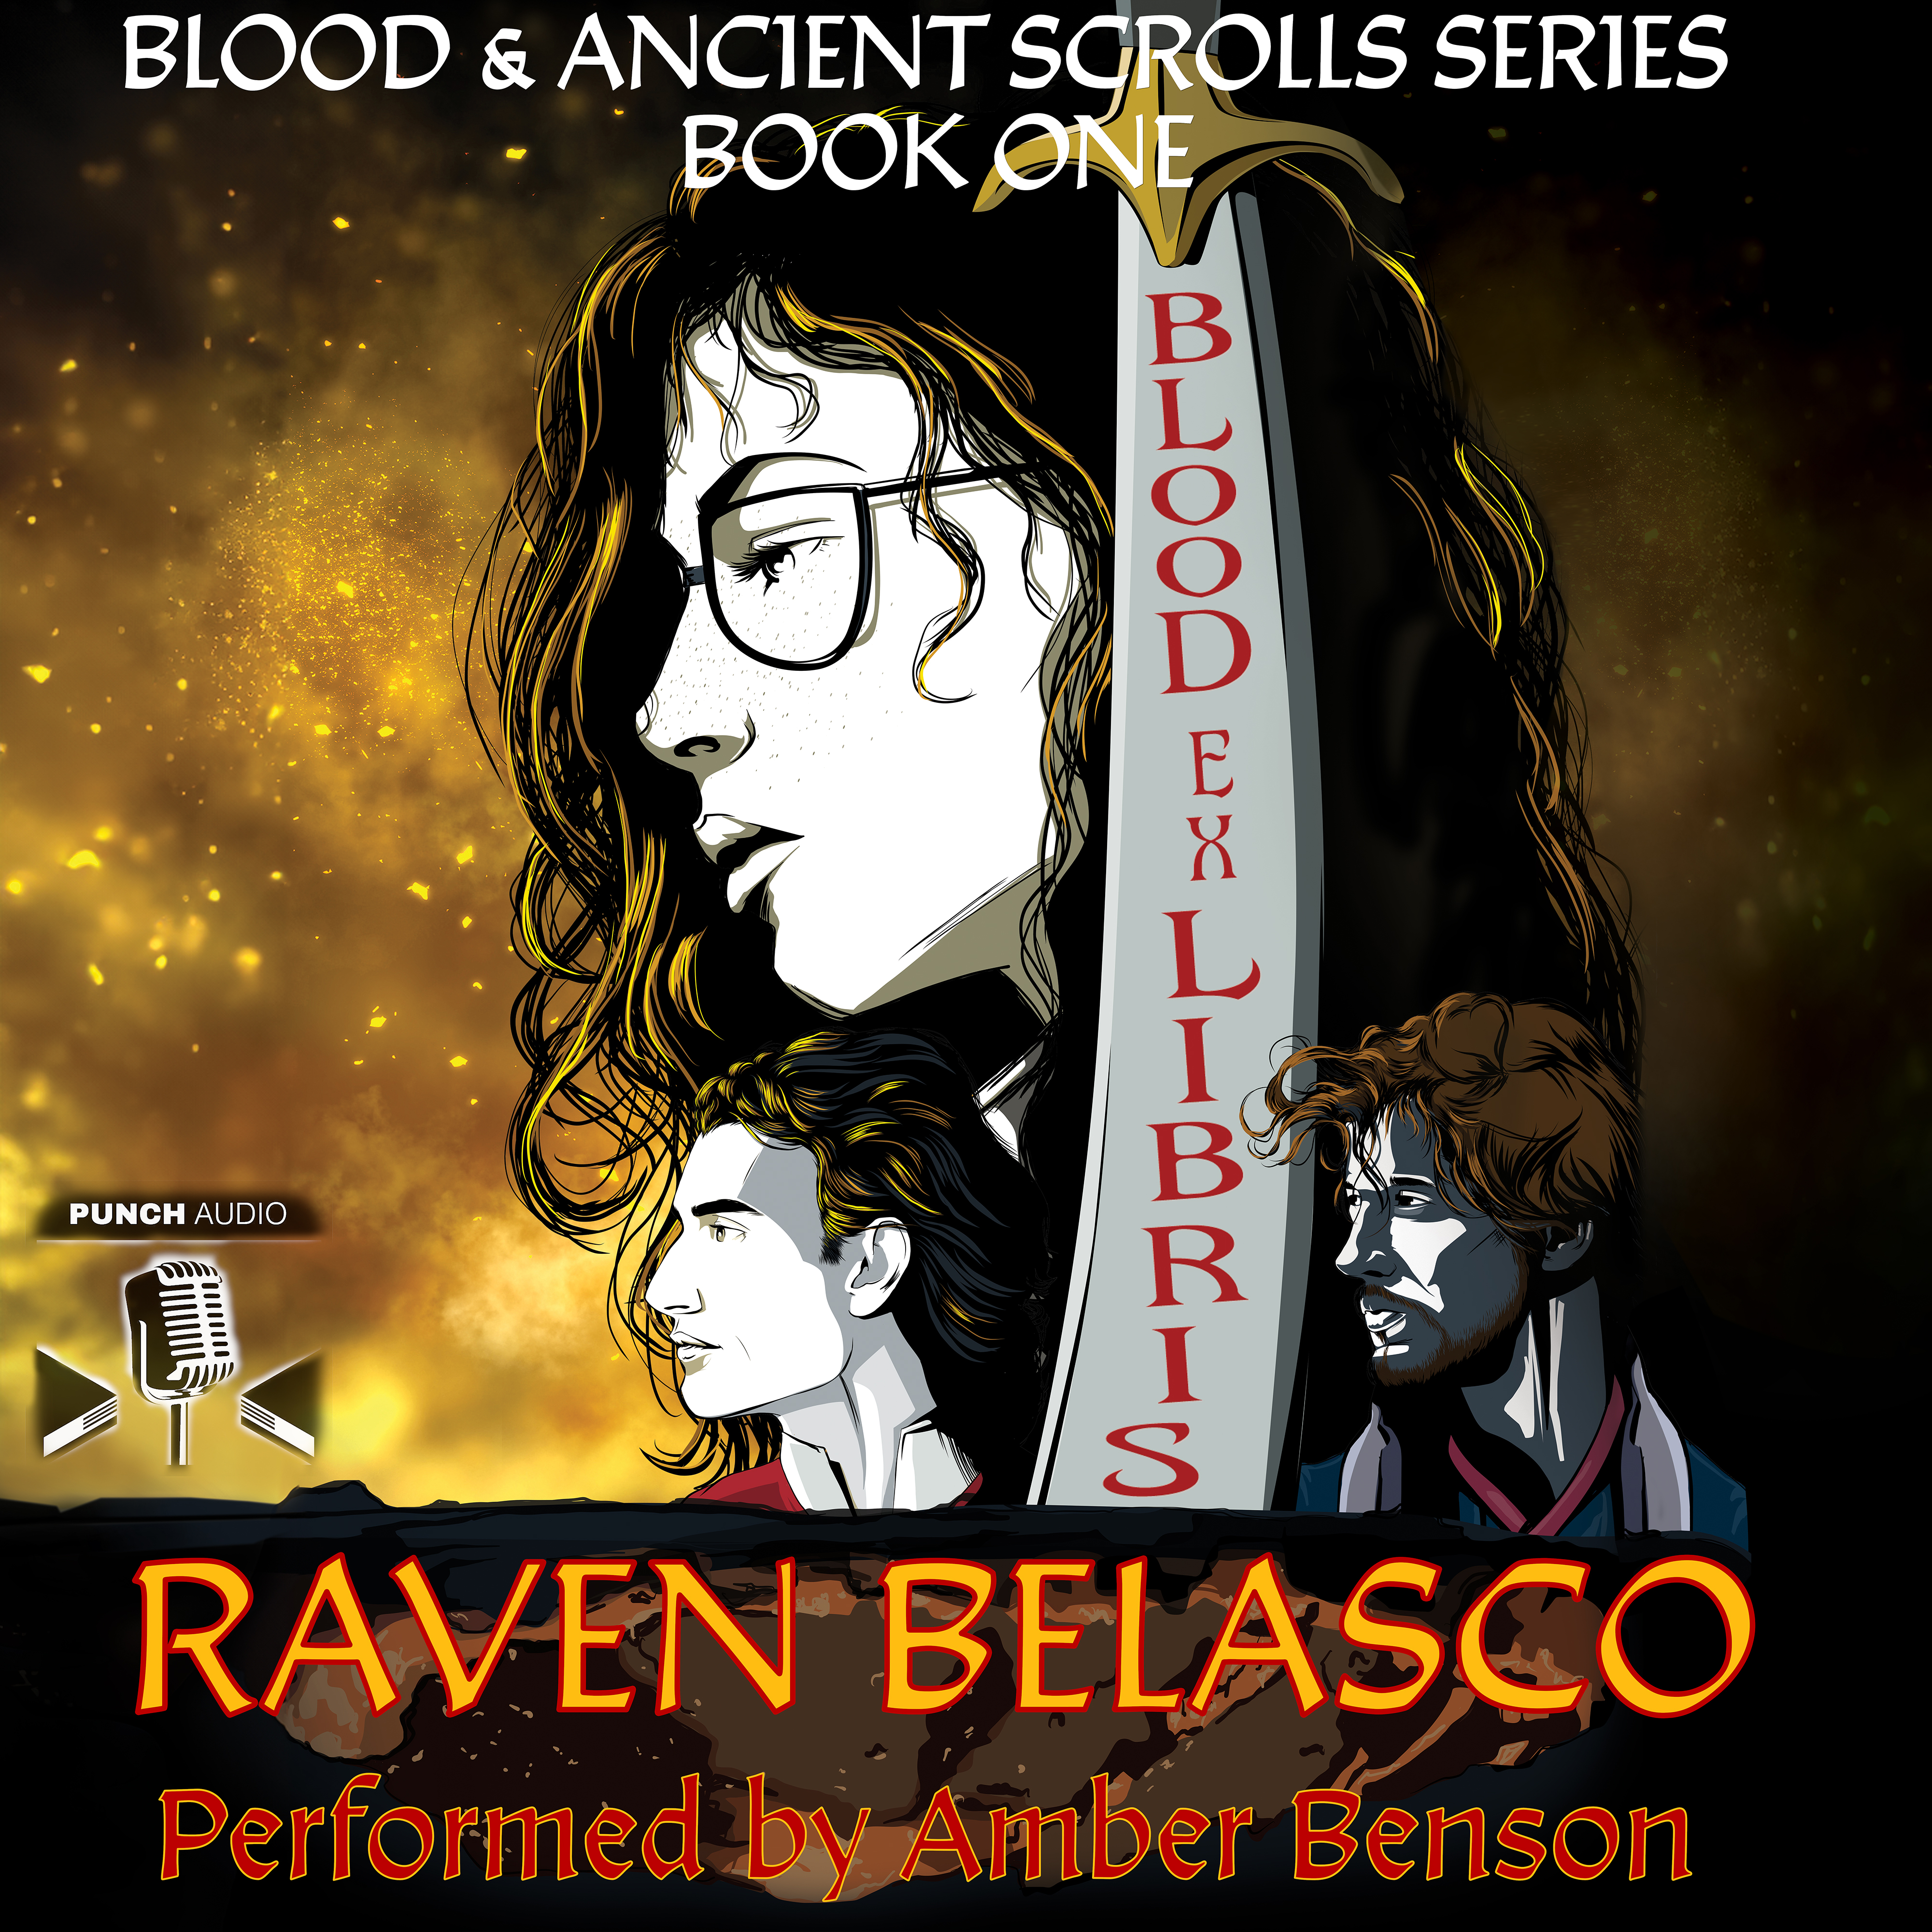 Blood Ex Libris by Raven Belasco narrated by Amber Benson